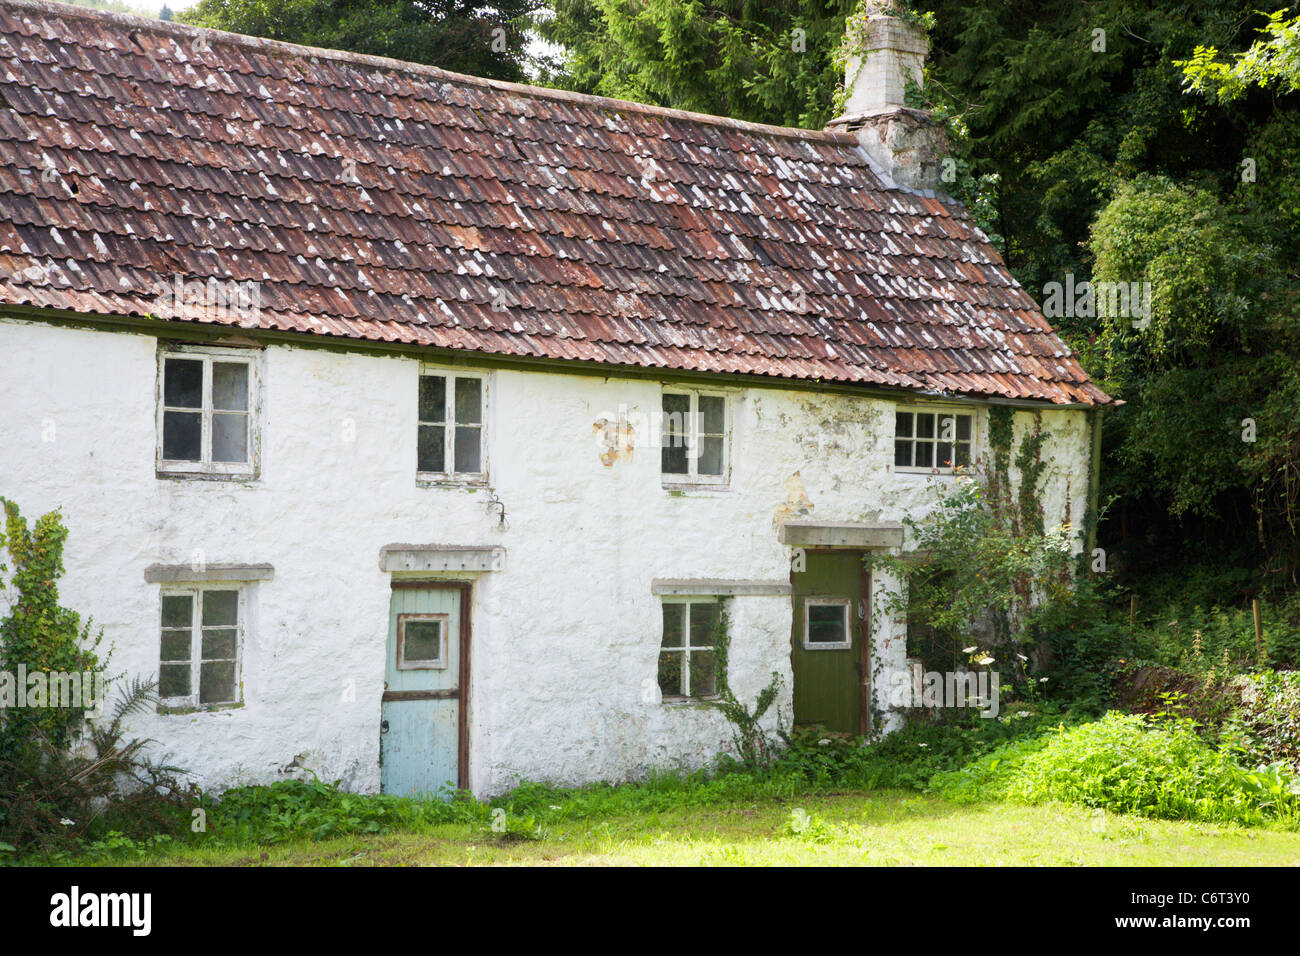 Delapidated Cottages Tintern Monmouthshire Wales Stock Photo